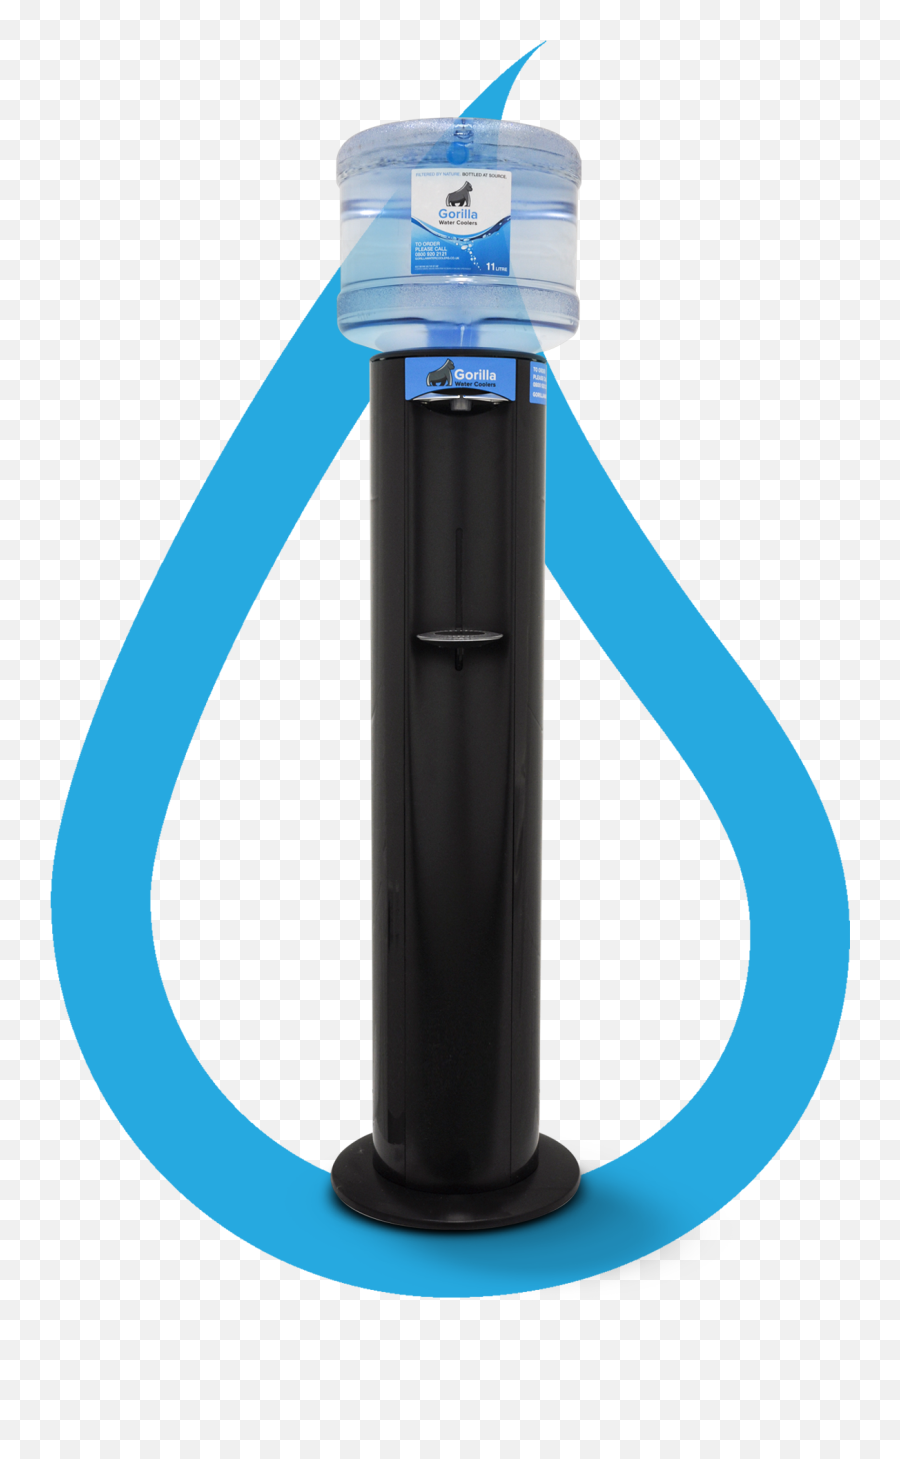 Affordable Water Coolers For The Office And Home - Gorilla Anti Kerncentrale Png,Water Dispenser Icon